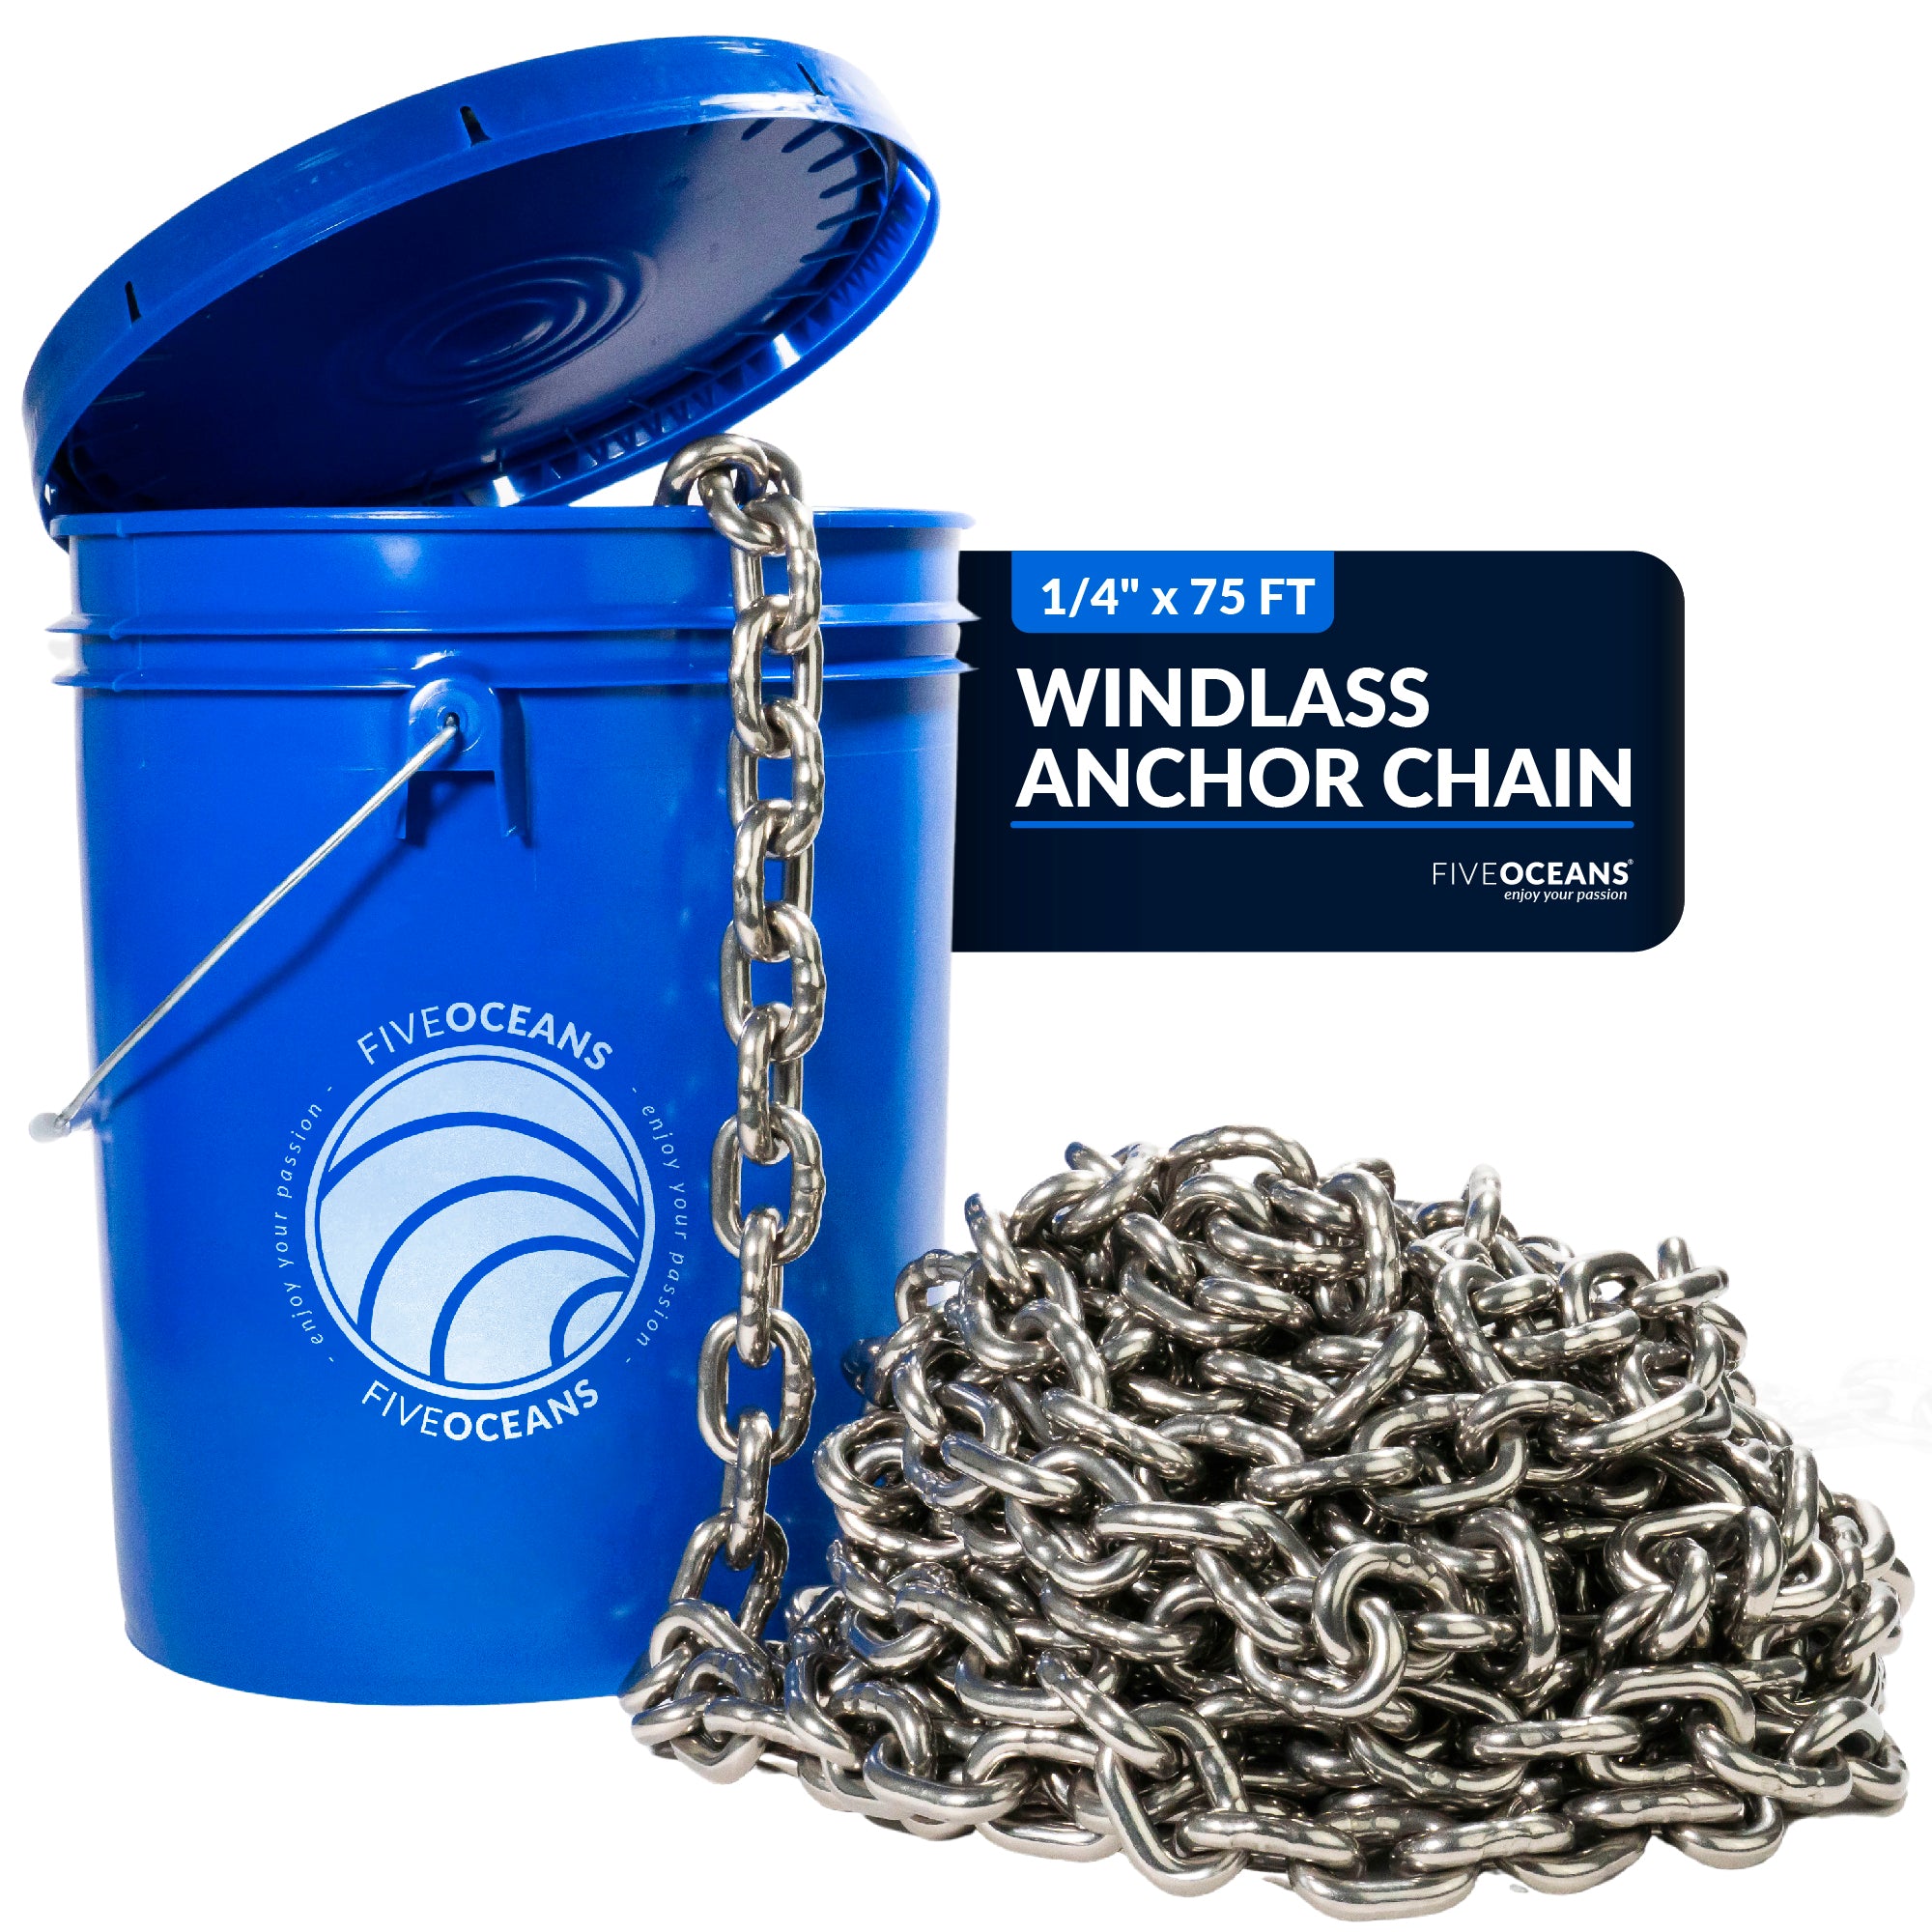 1/4" x 75' Boat Windlass Anchor Chain HT G4 Stainless Steel - FO4492-M75